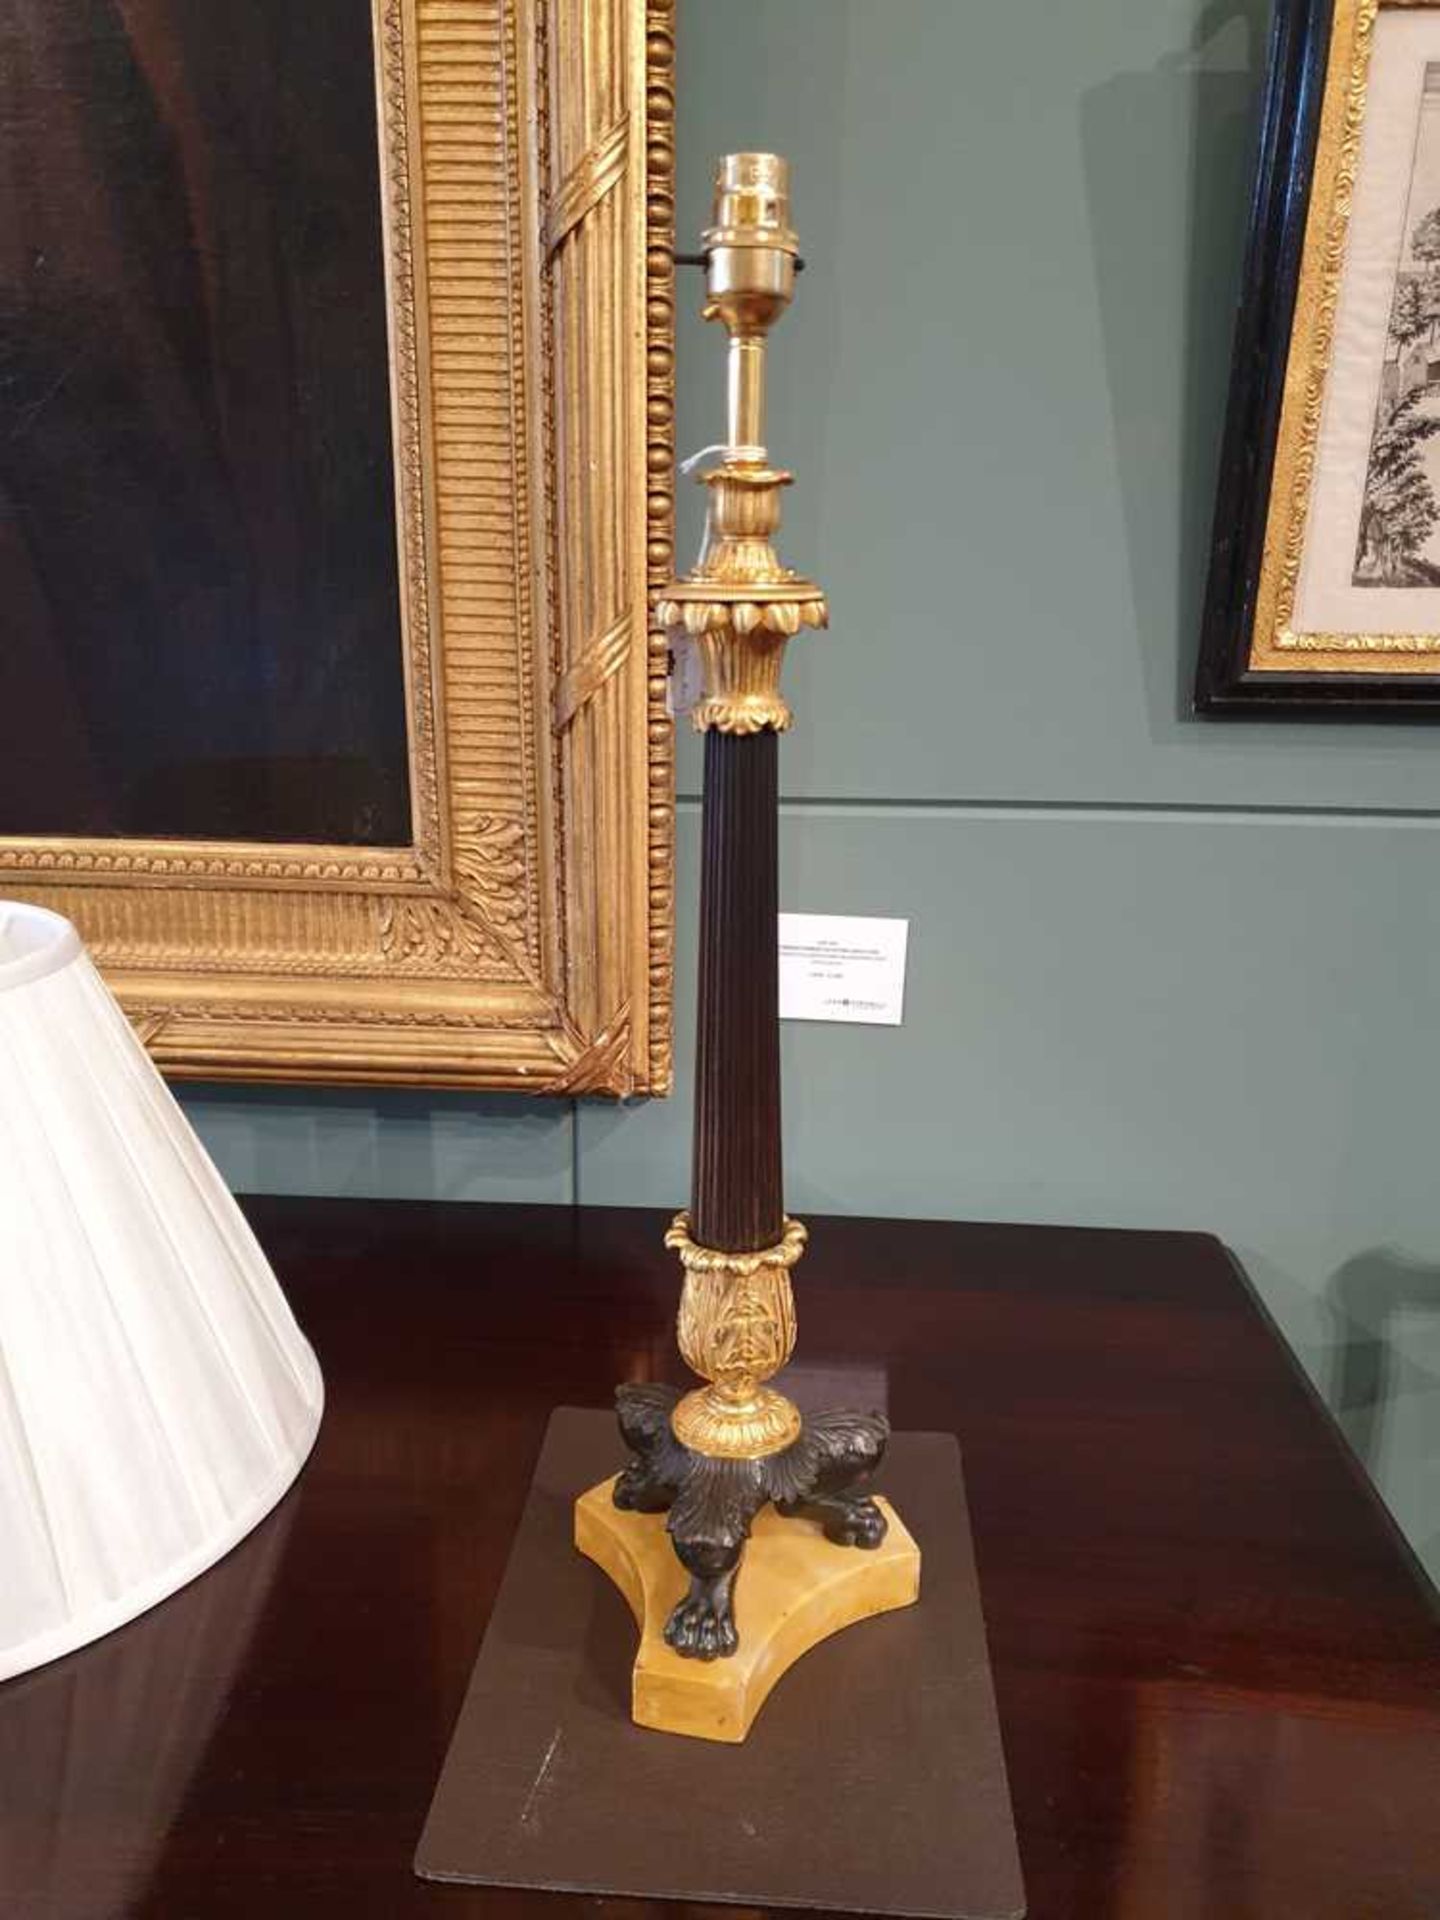 PAIR OF REGENCY PATINATED AND GILT BRONZE CANDLESTICK LAMPS 19TH CENTURY - Image 10 of 13